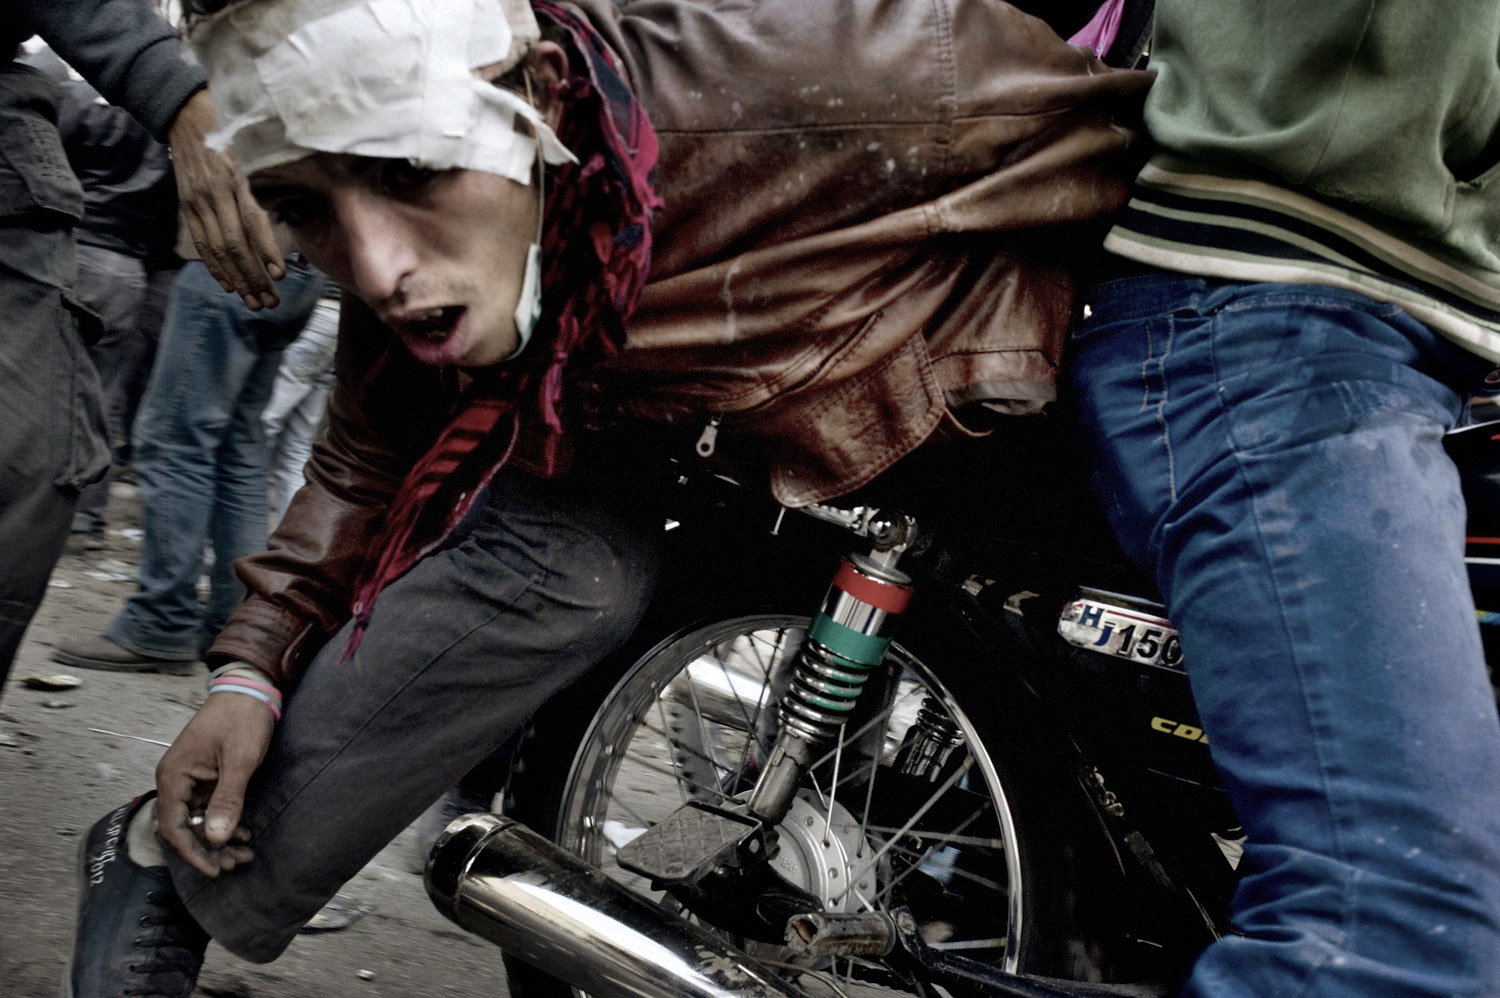 A wounded protester is evacuated on the back of a motorcycle, November 23, 2011.